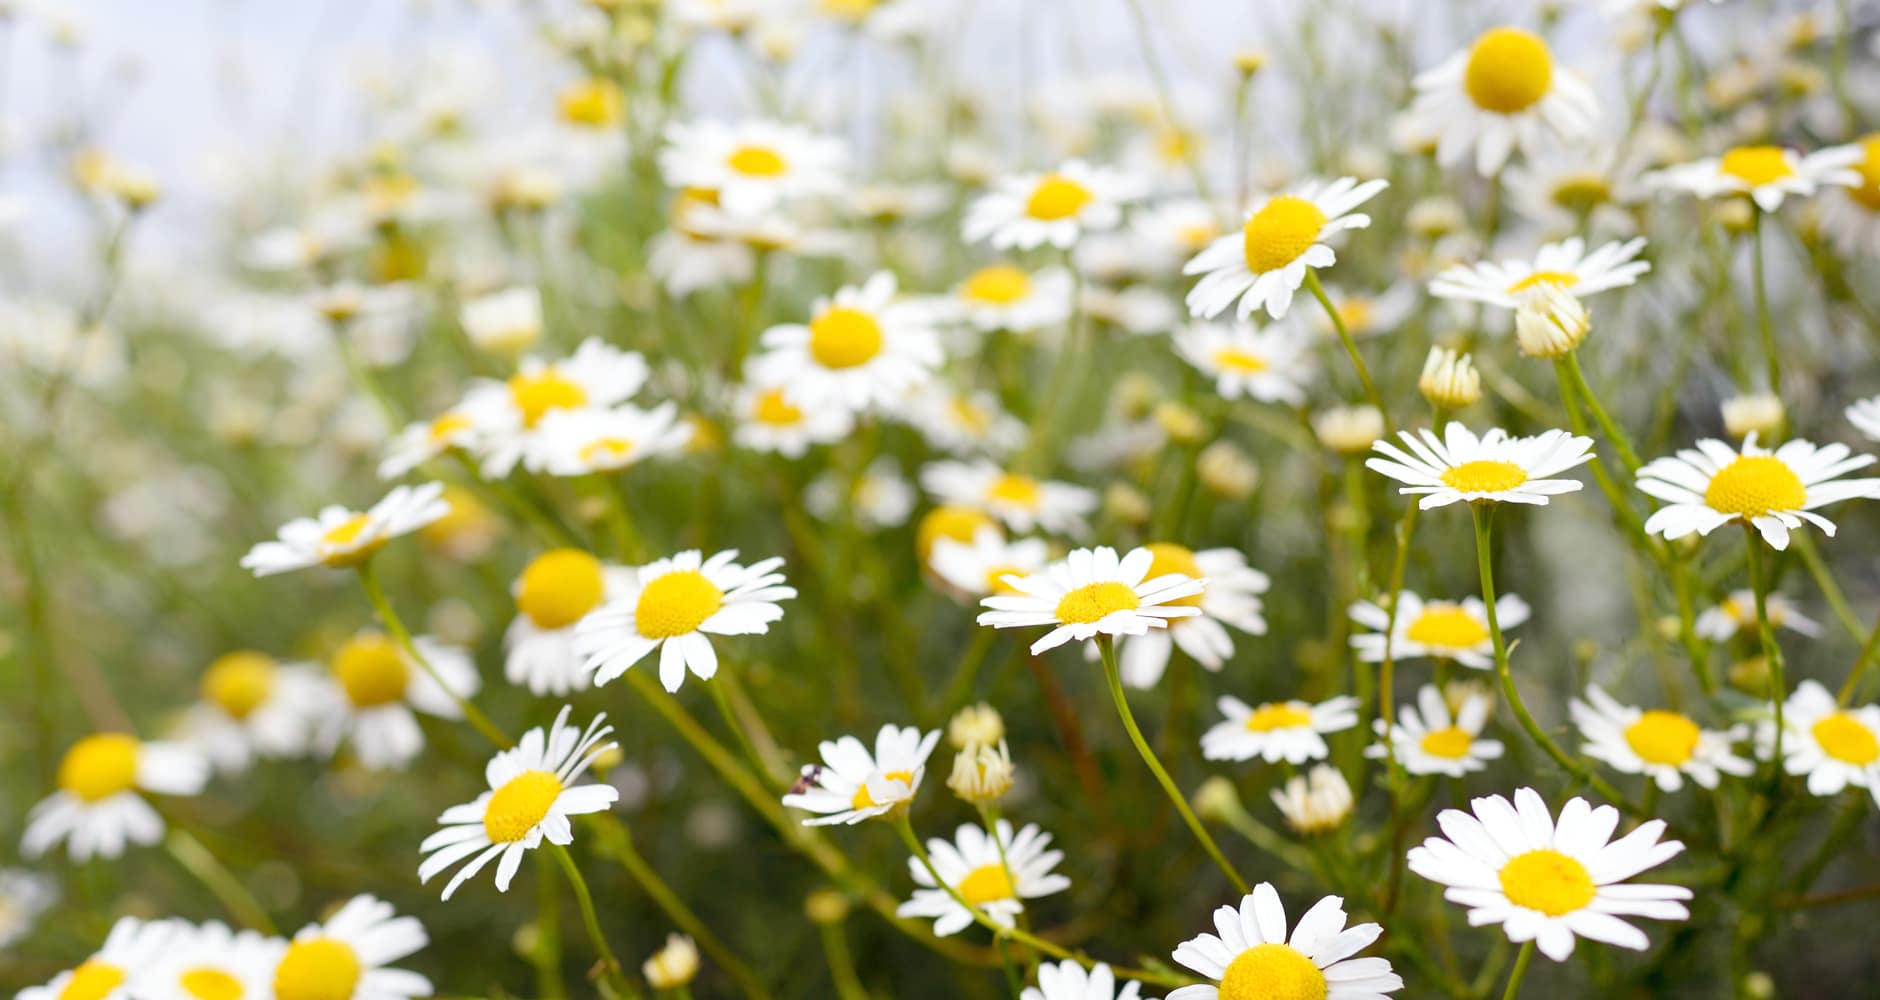 chamomile is an edible flower often used in tea